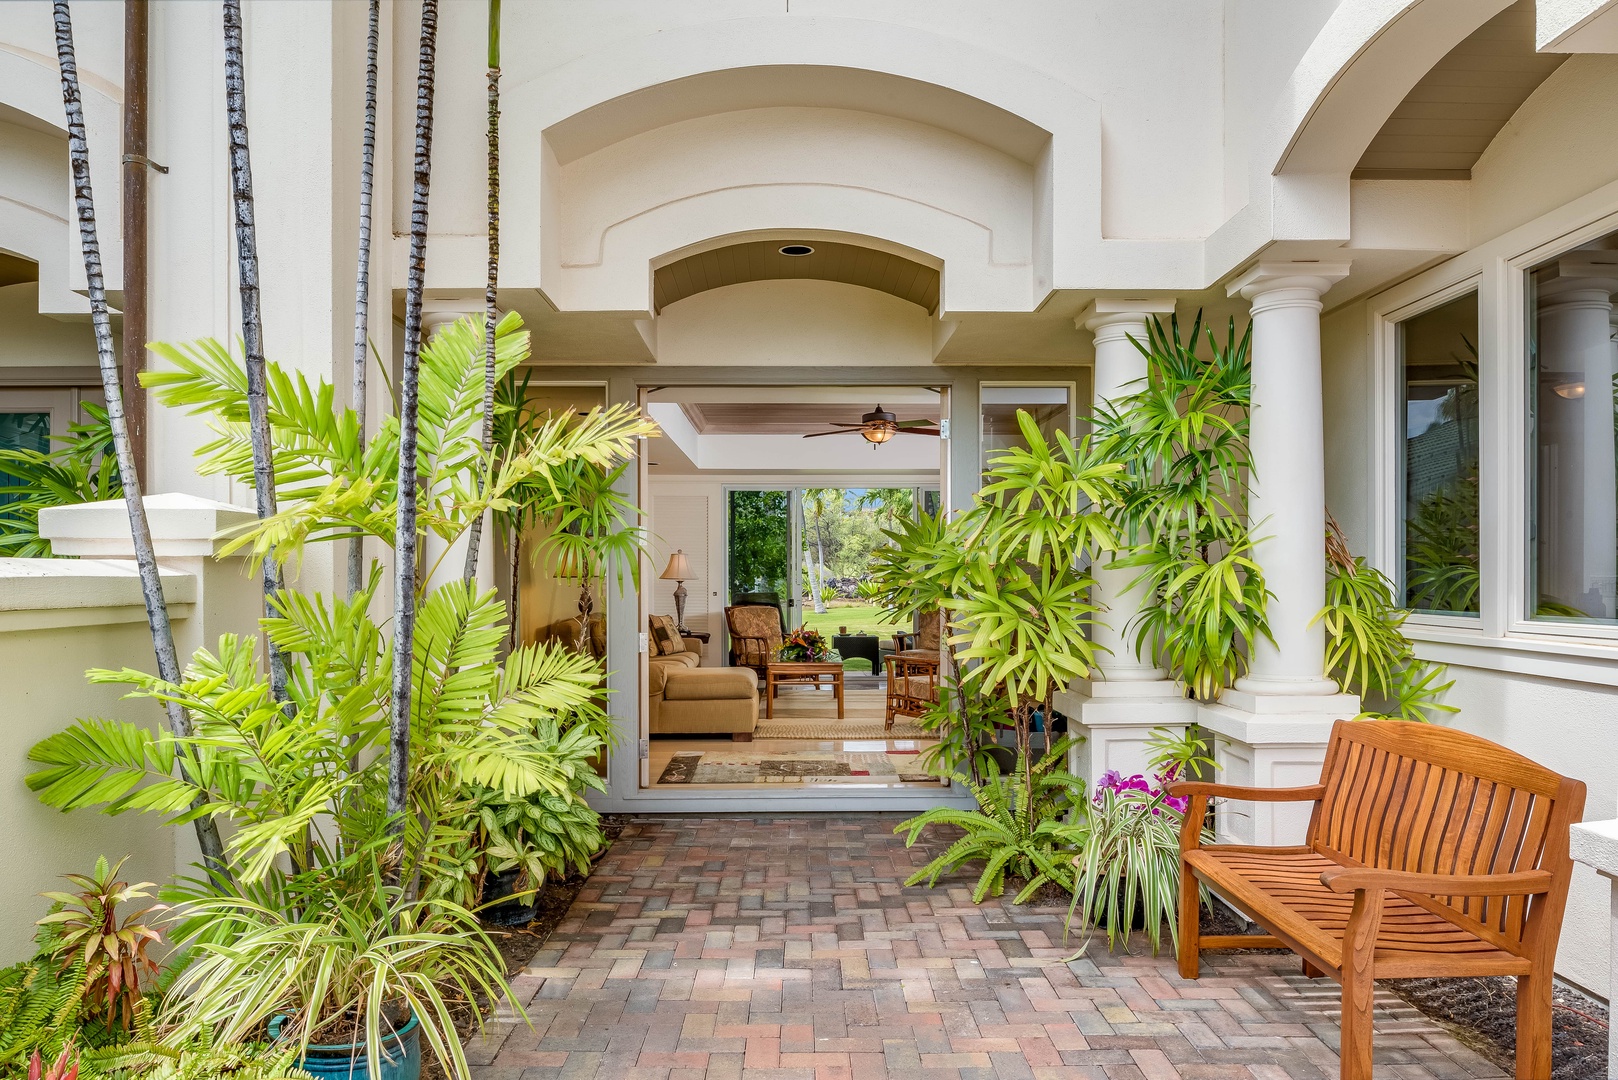 Kamuela Vacation Rentals, The Islands D3 - Gated Courtyard Entrance Into the Living Room